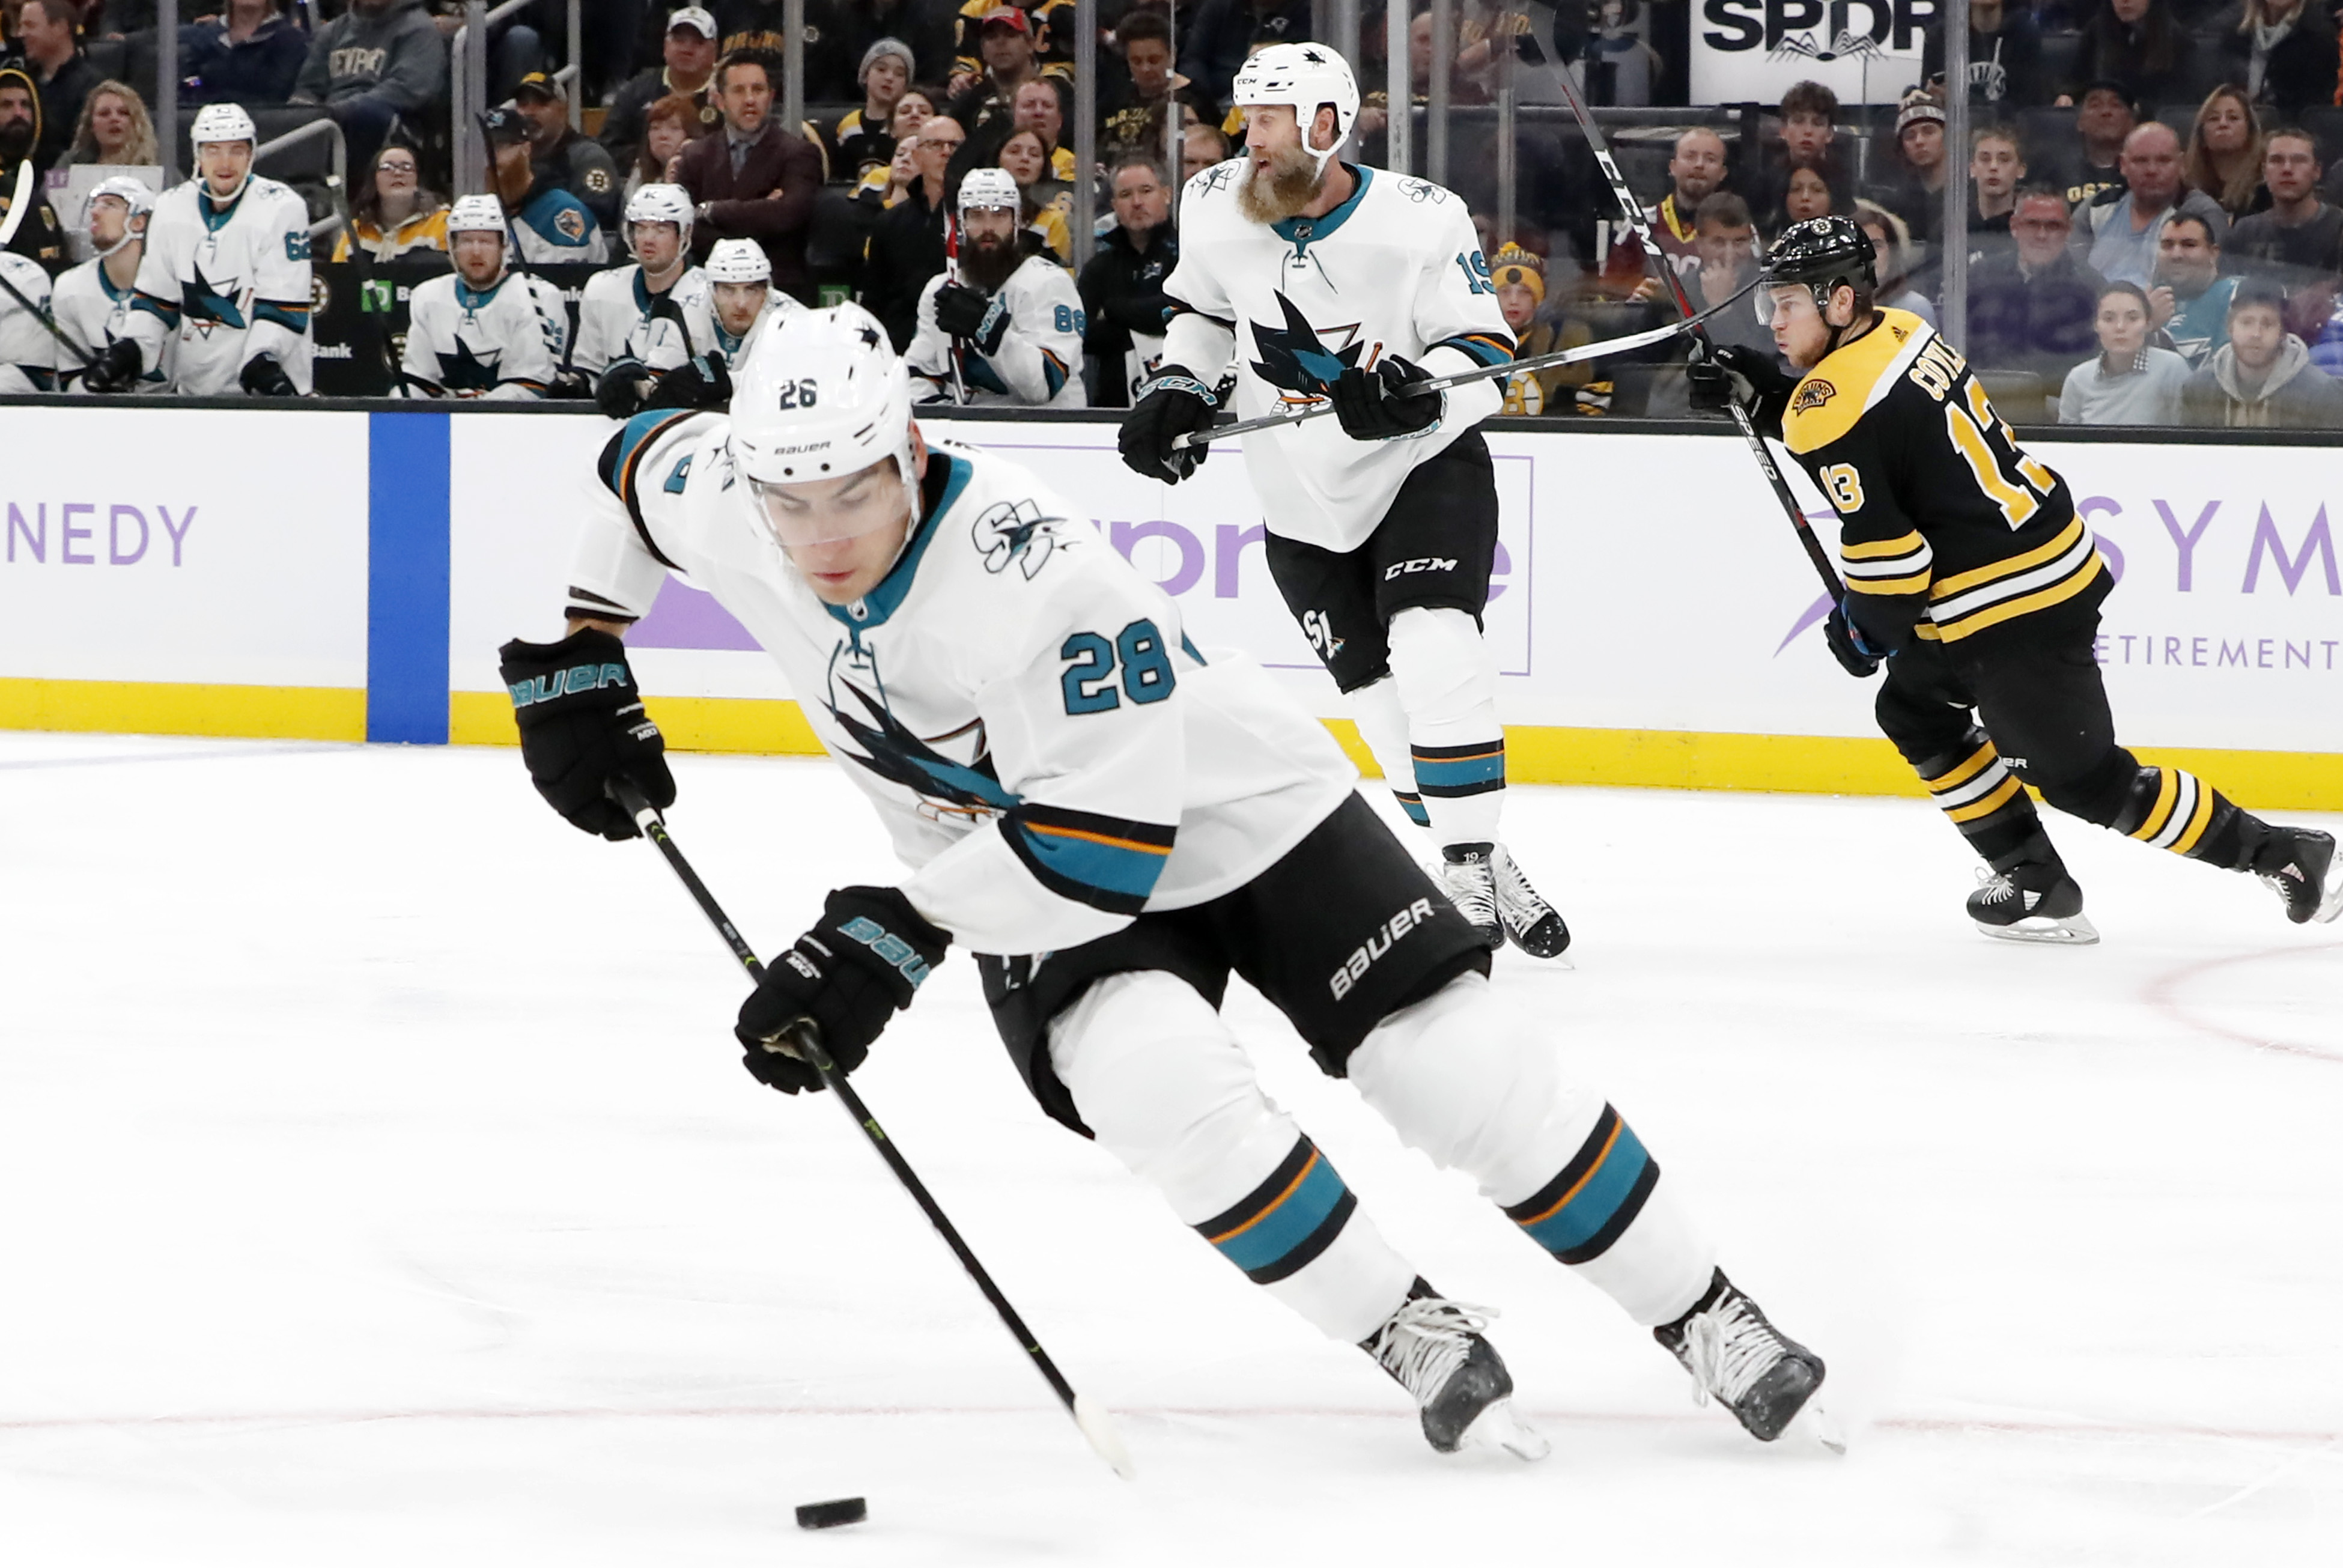 San Jose Sharks left wing Timo Meier (28) picks up the puck during a game between the Boston Bruins and the San Jose Sharks on October 29, 2019, at TD Garden in Boston, Massachusetts.